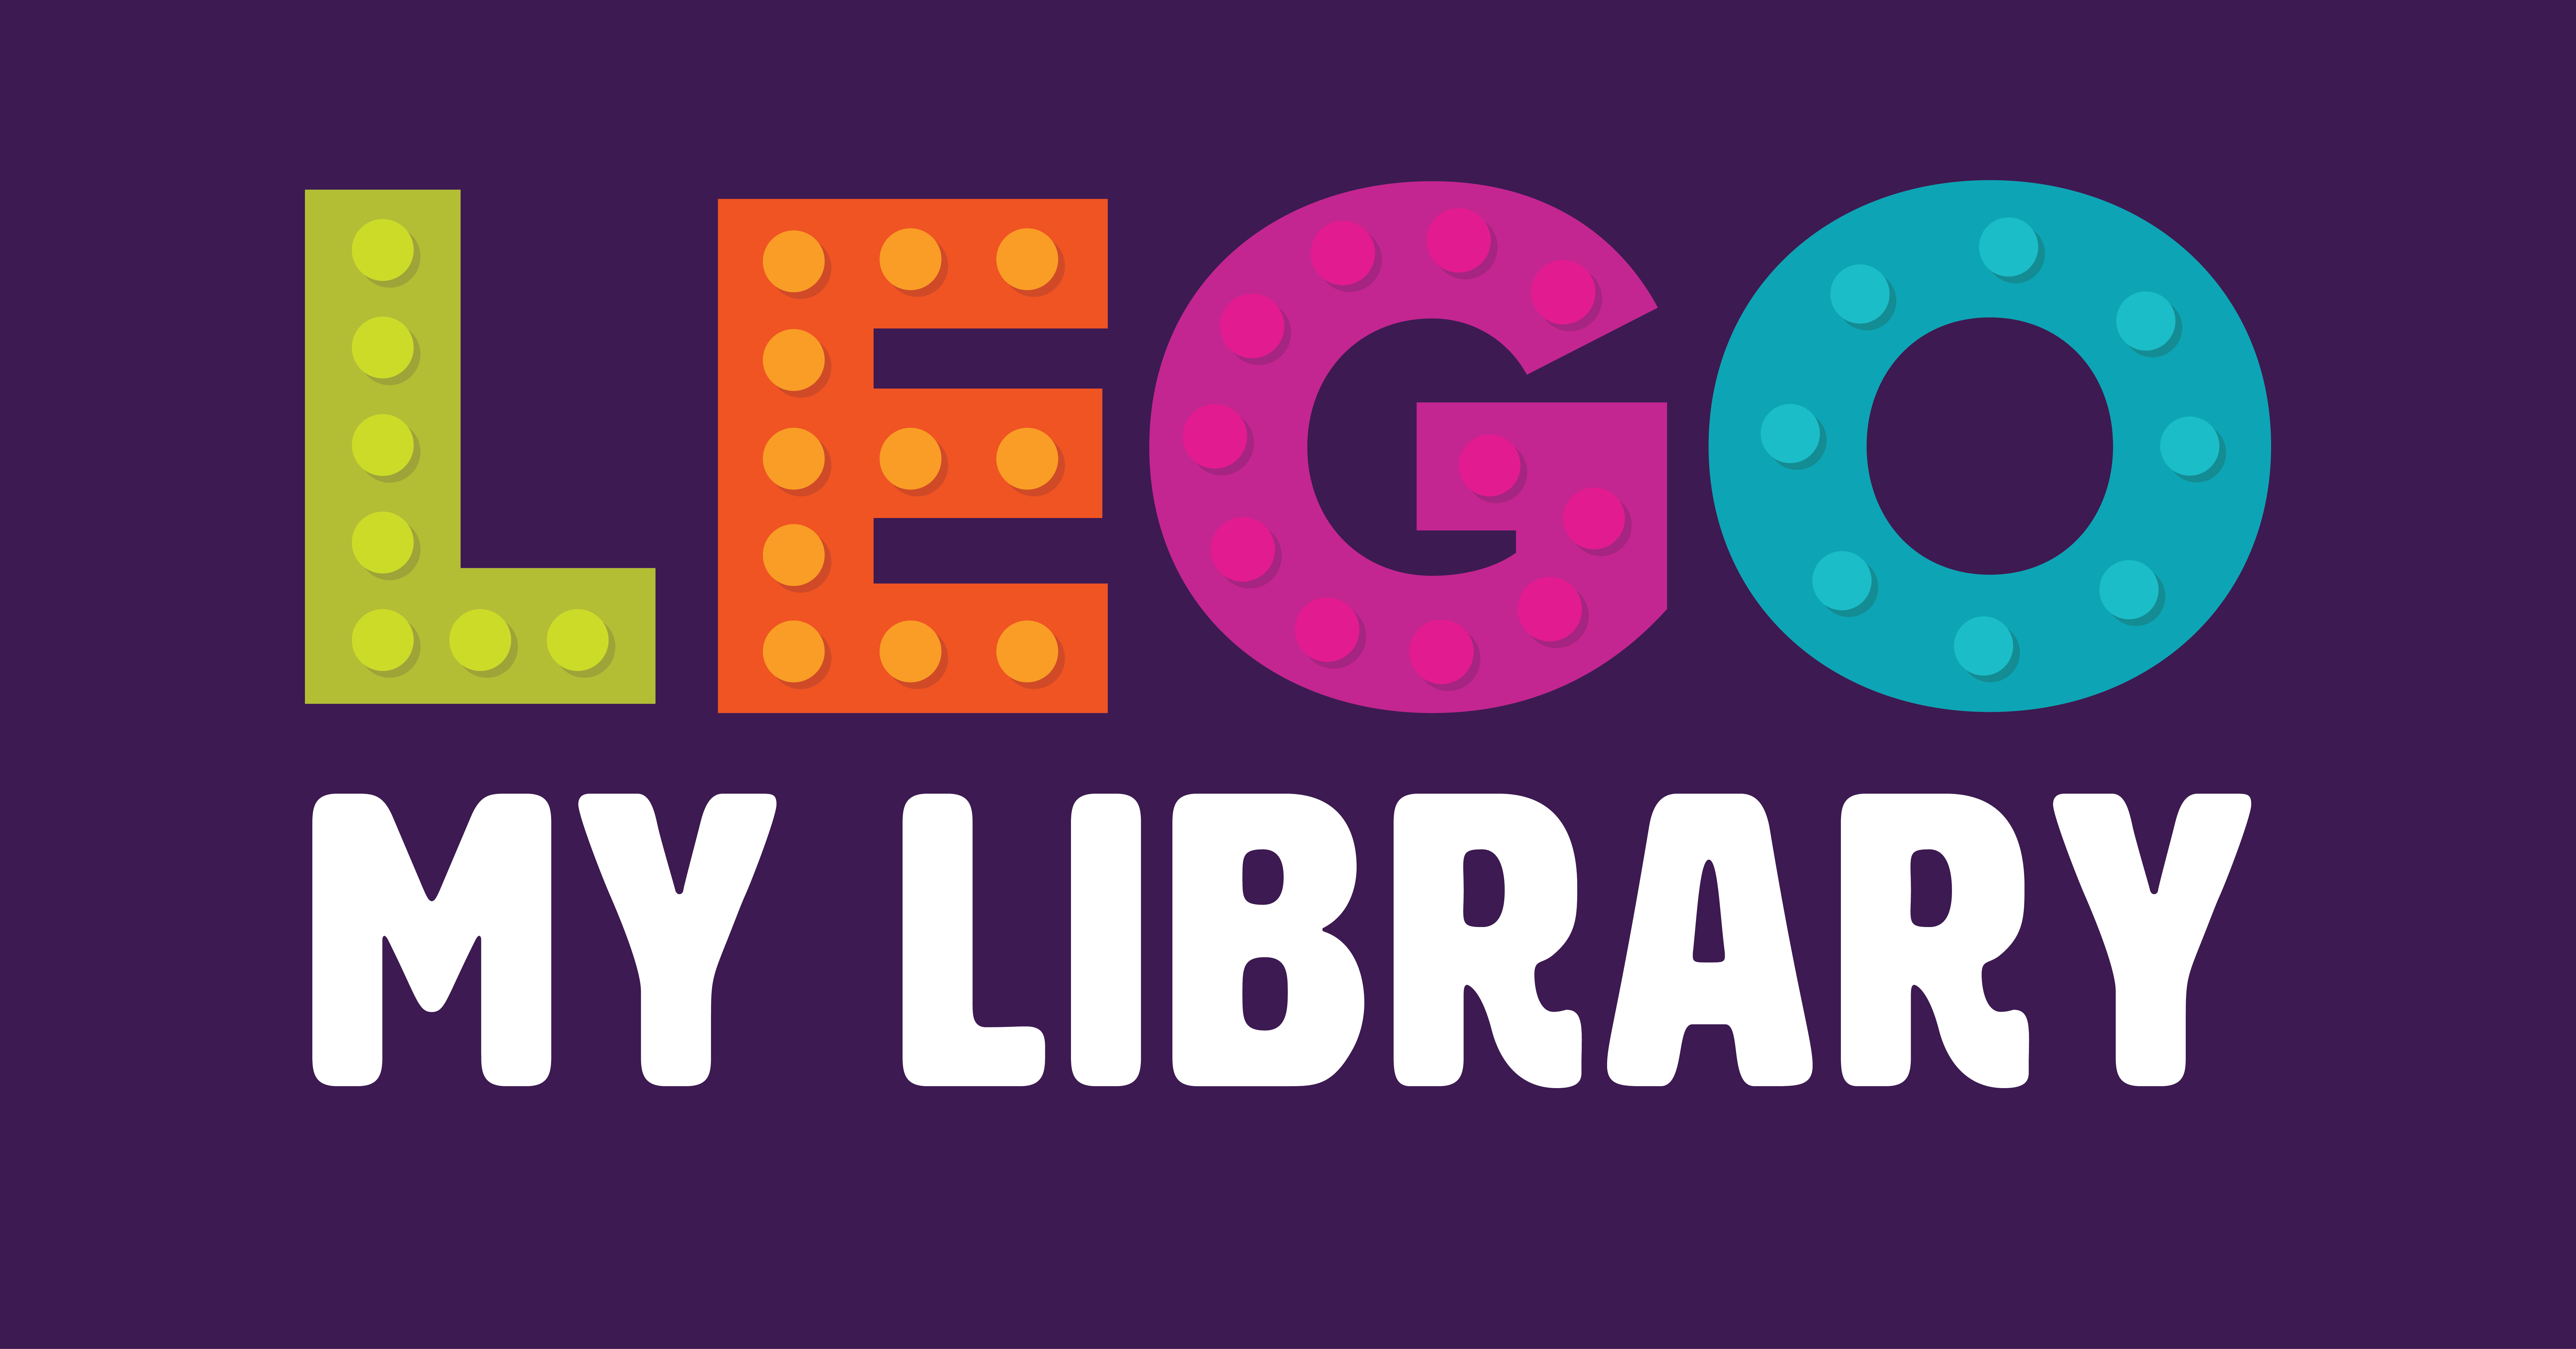 Image for Lego My Library.